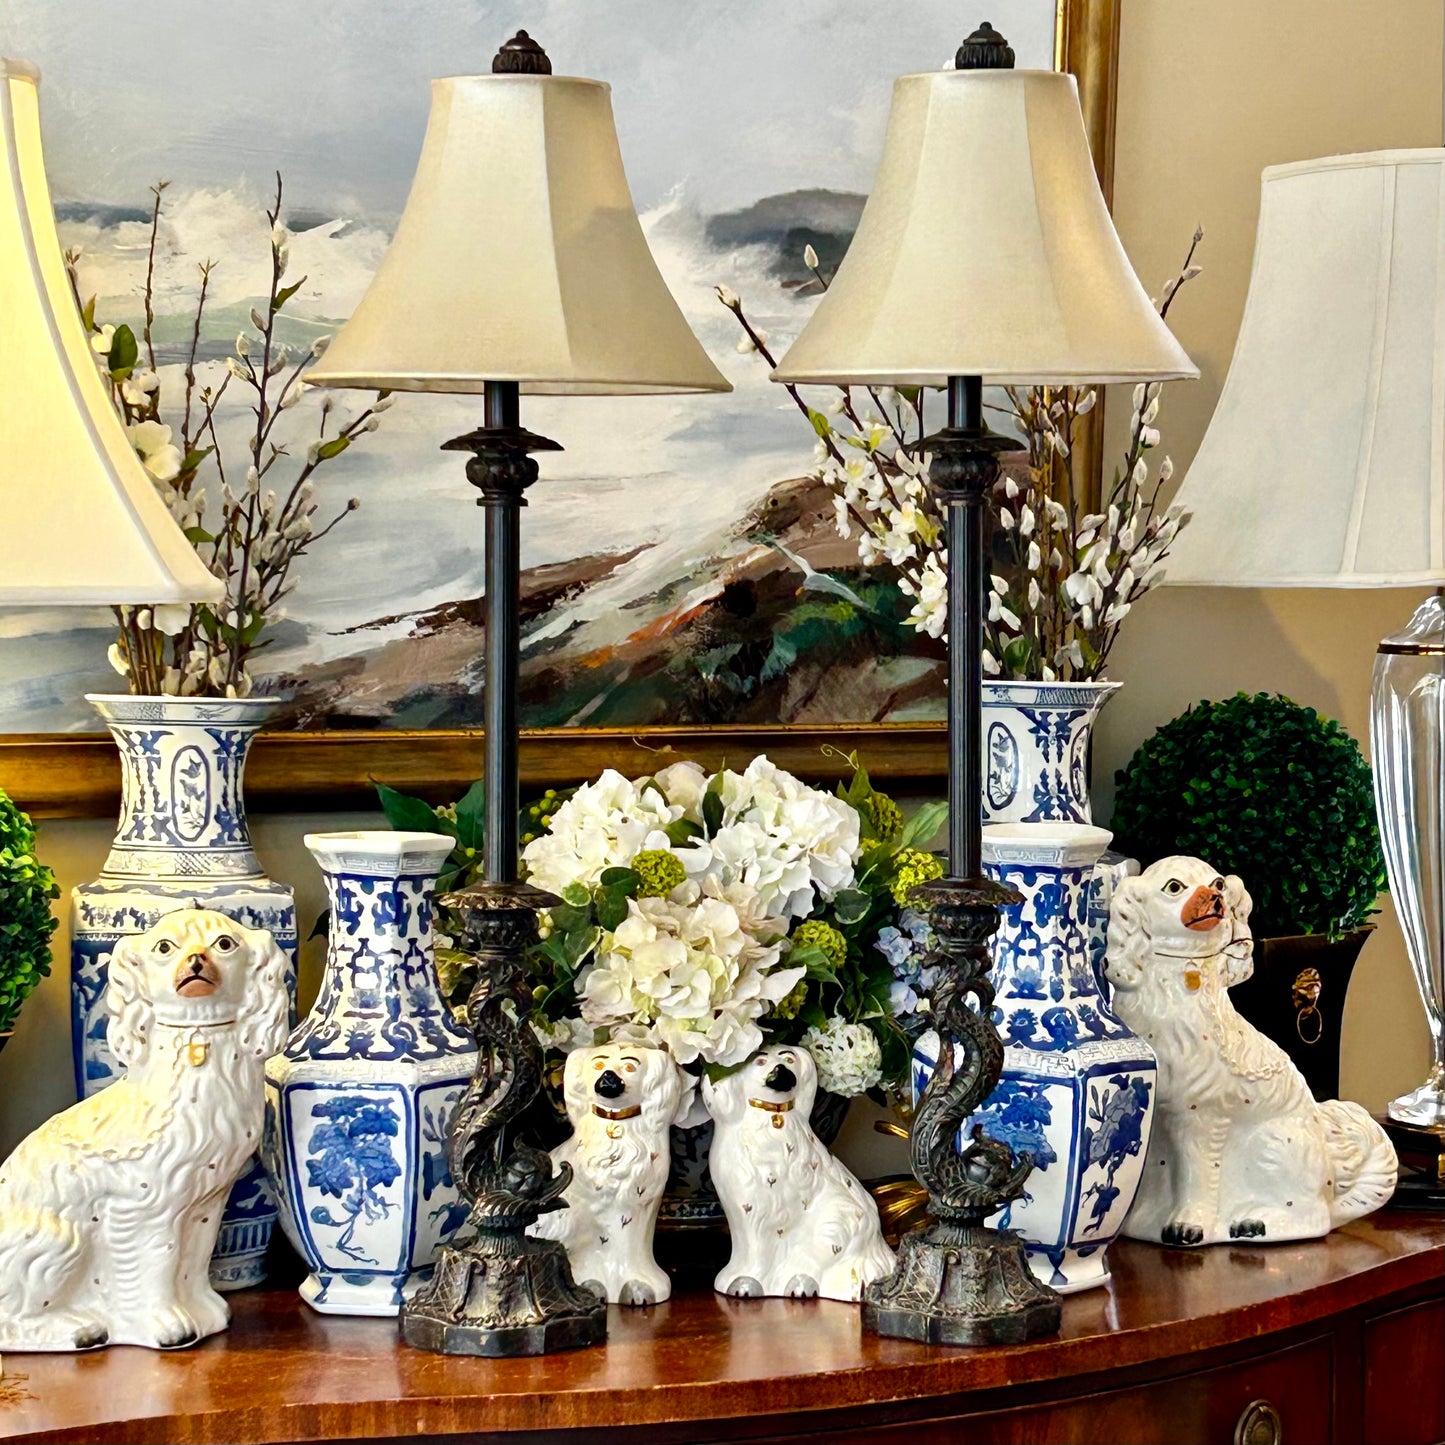 Set of two identical statuesque Lamps Dolphin/ Koi Fish lamps.